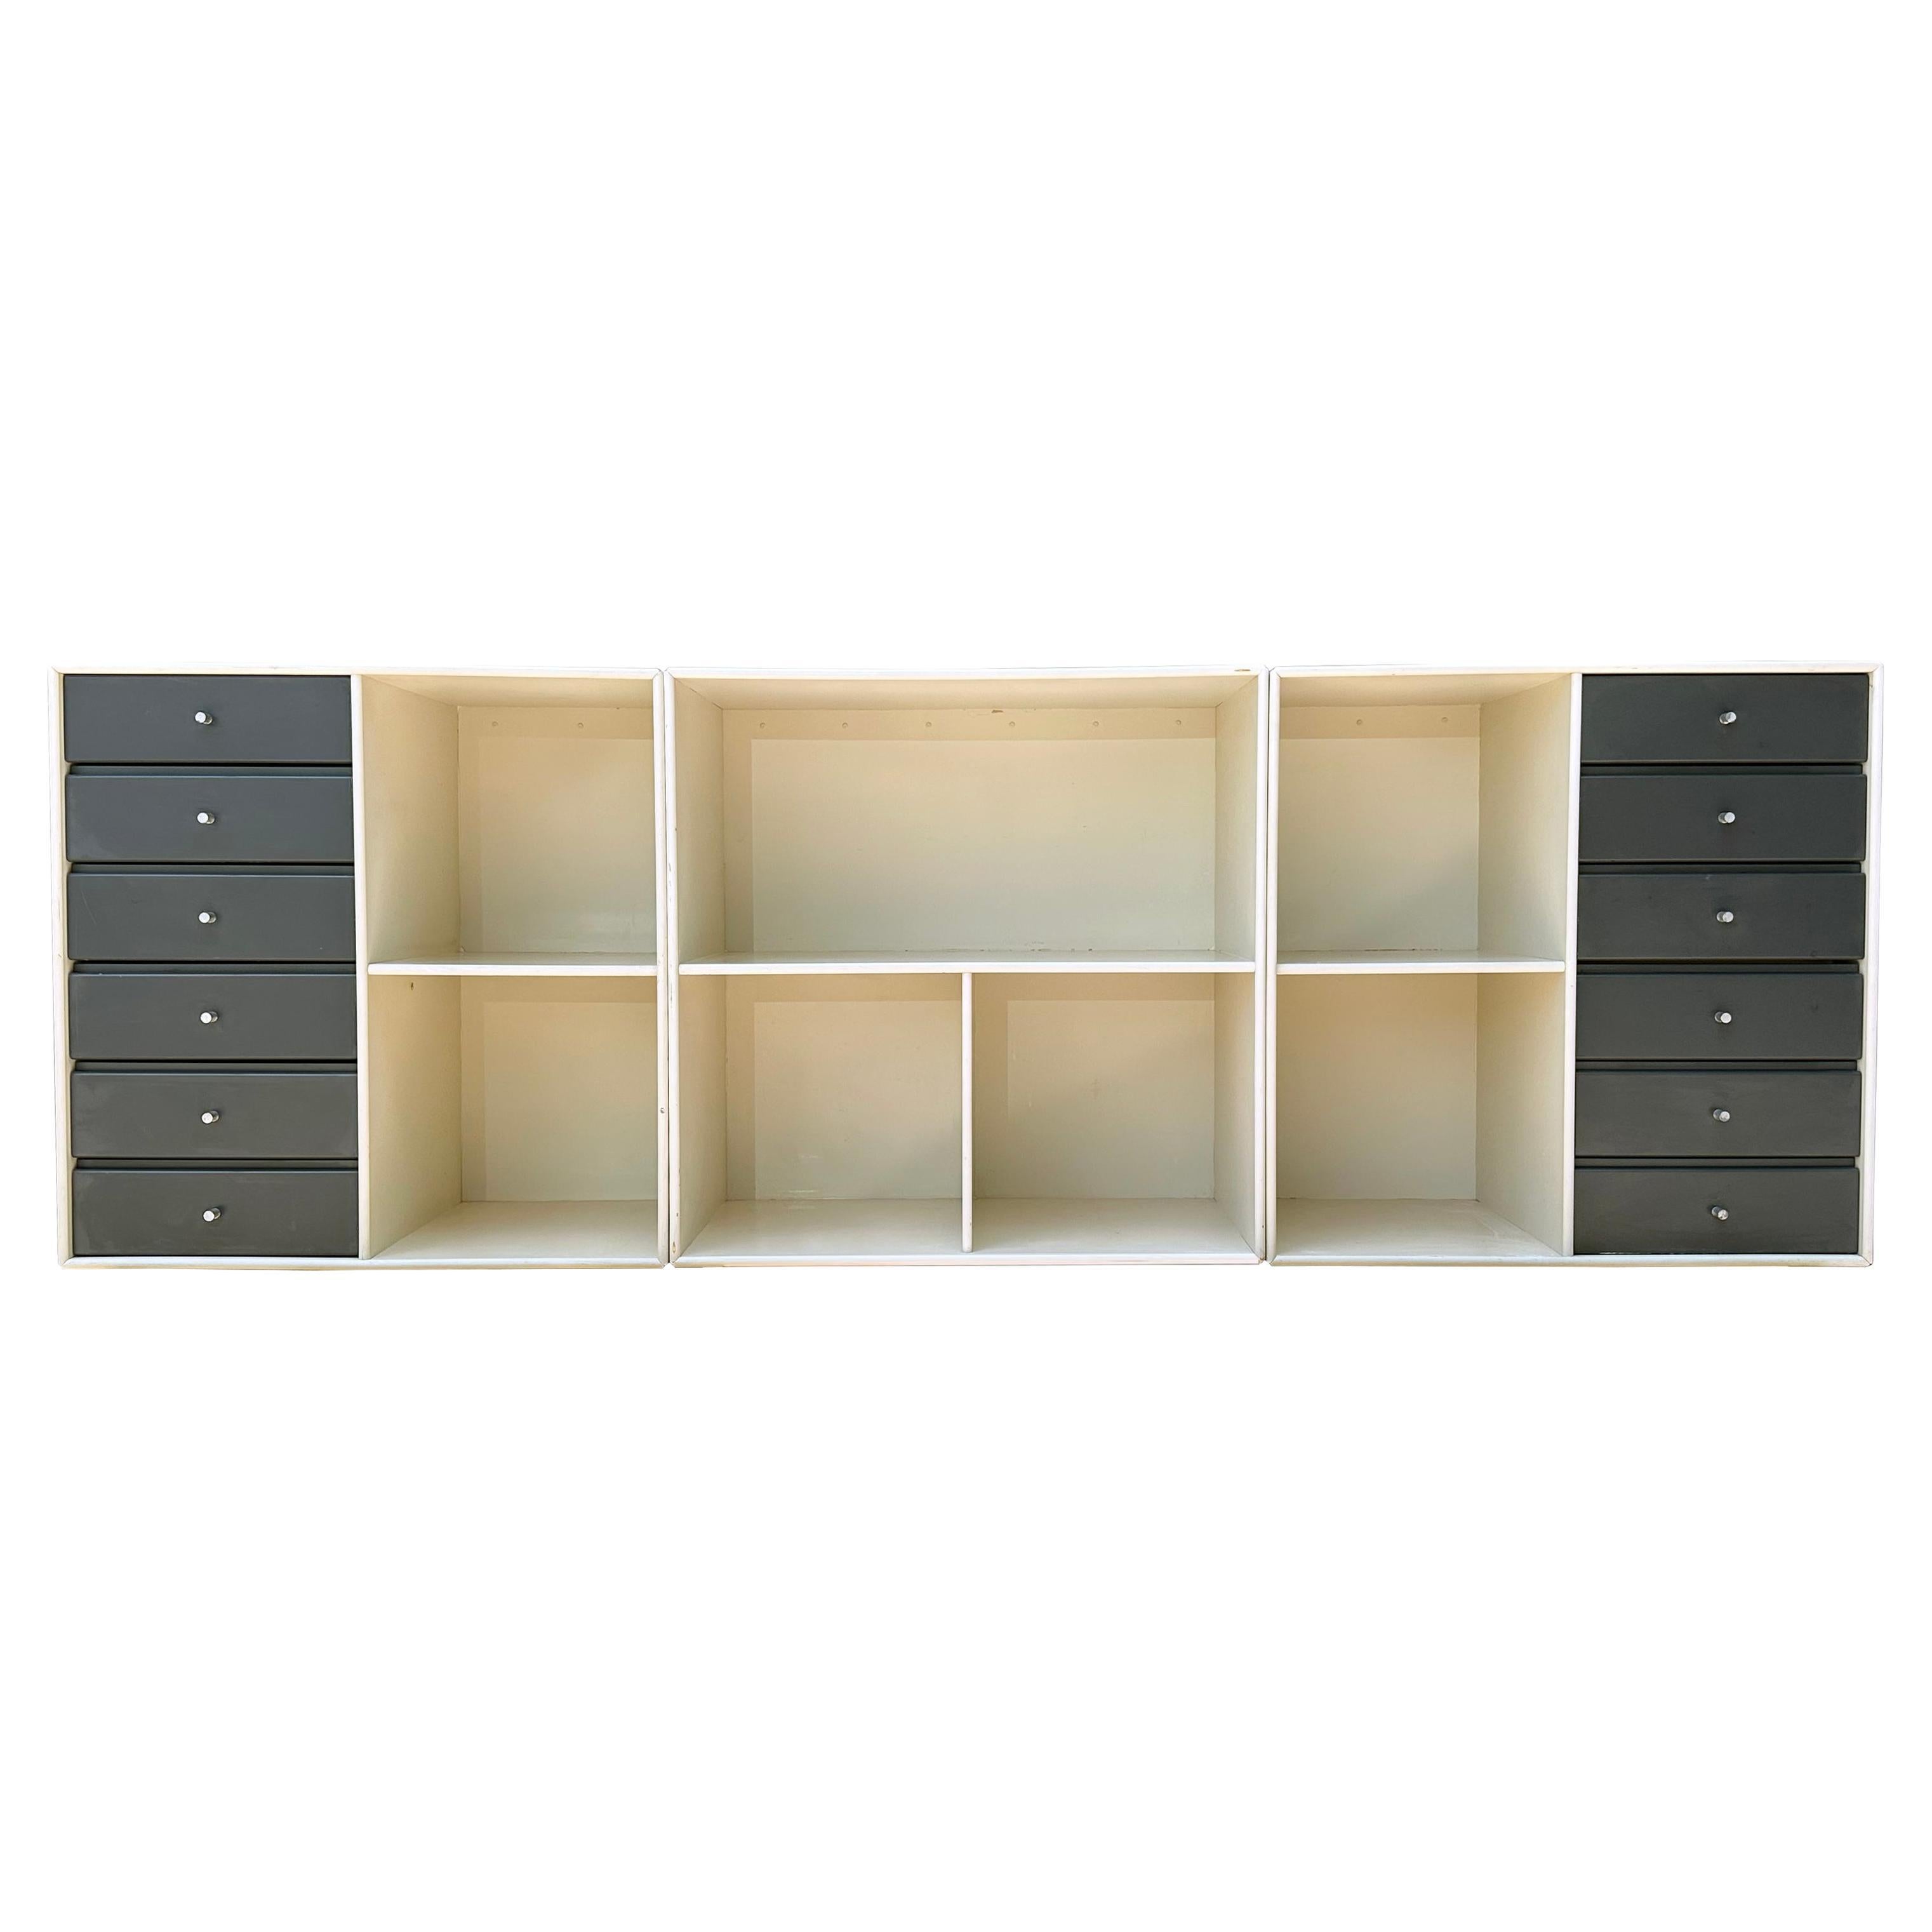 Danish modern 3 piece modular suspension credenza unit by Peter J. Lassen for Montana Mobler. This piece can by hung on the wall or stacked or placed on the floor. Set includes 2 opposing 6 drawer shelving units and 1 open shelf unit. Shelf openings